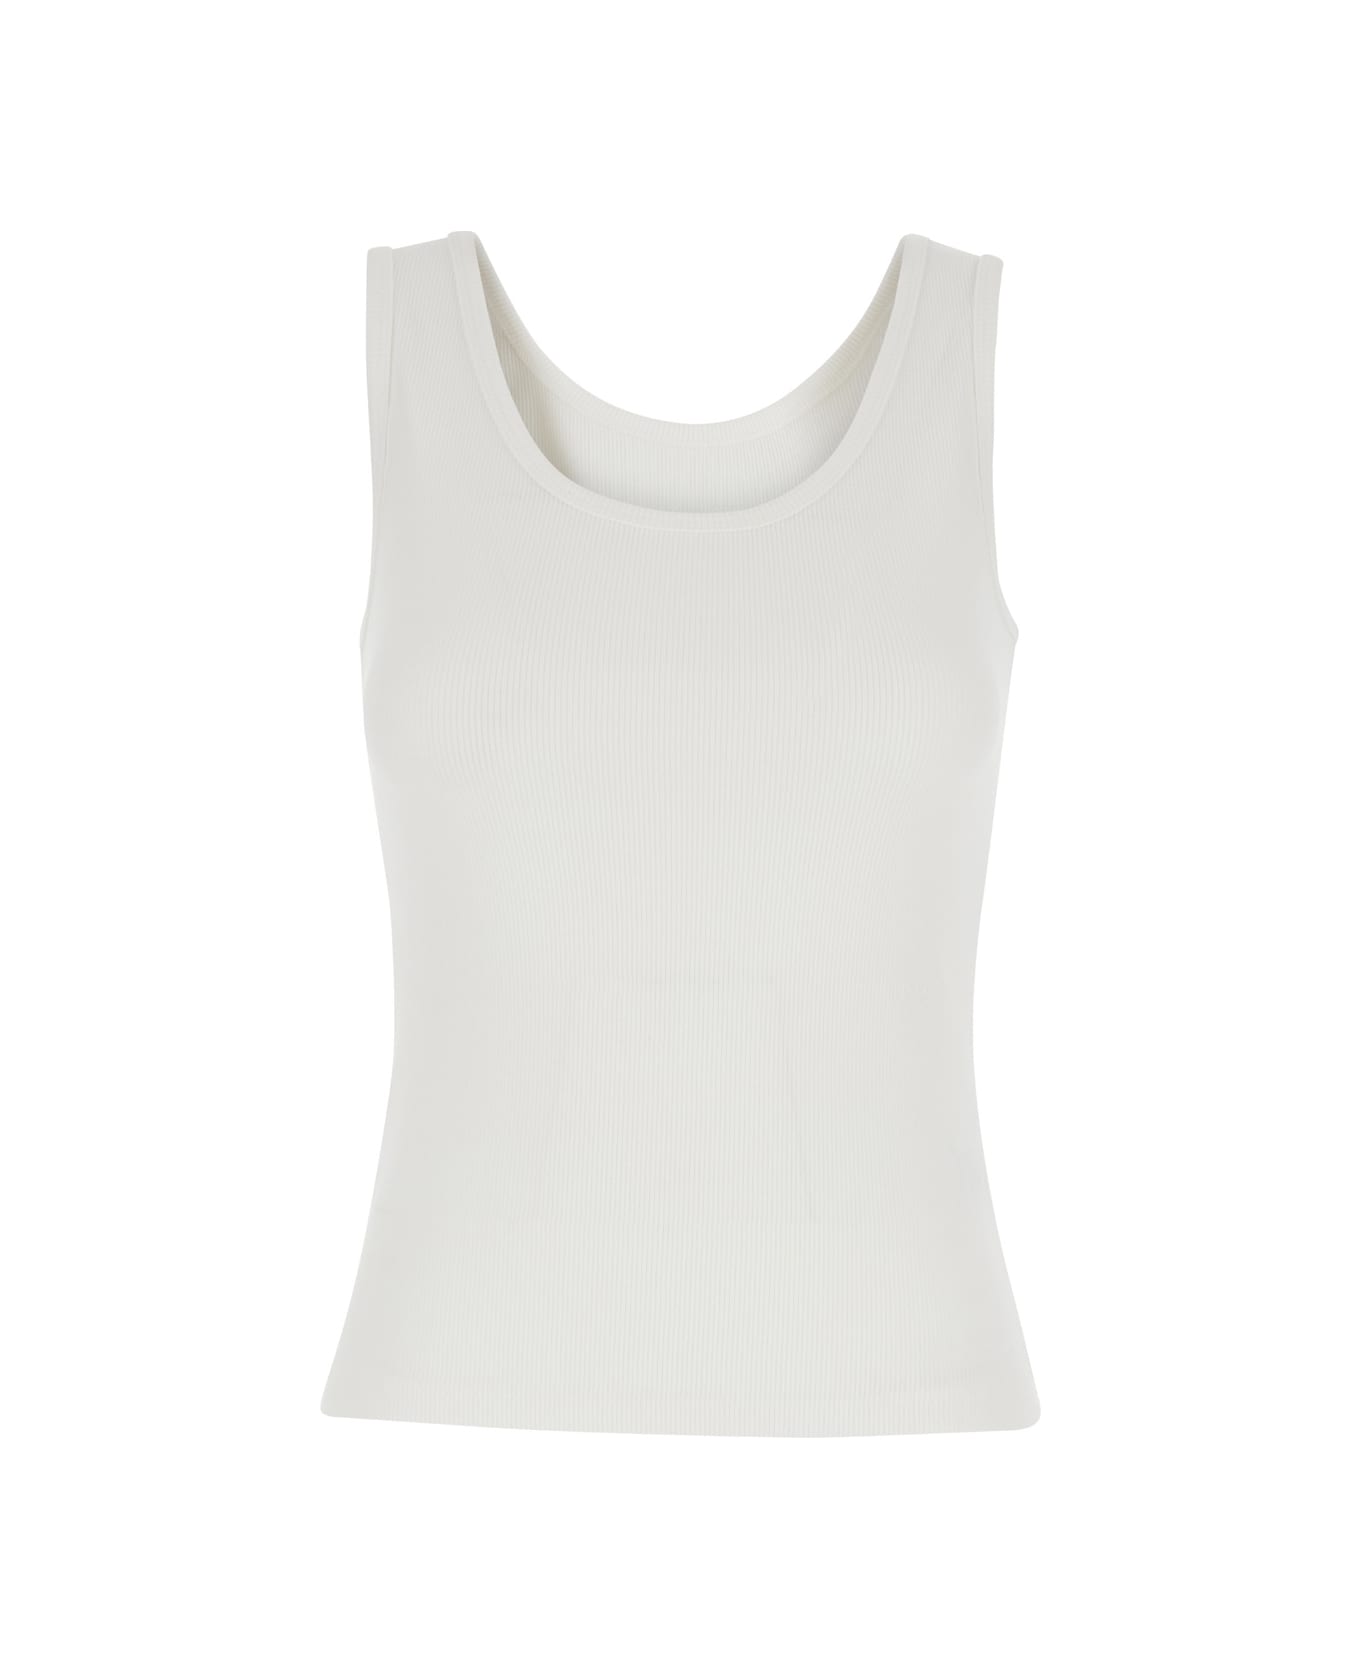 Dunst White Tank Top In Cotton Blend Woman - White